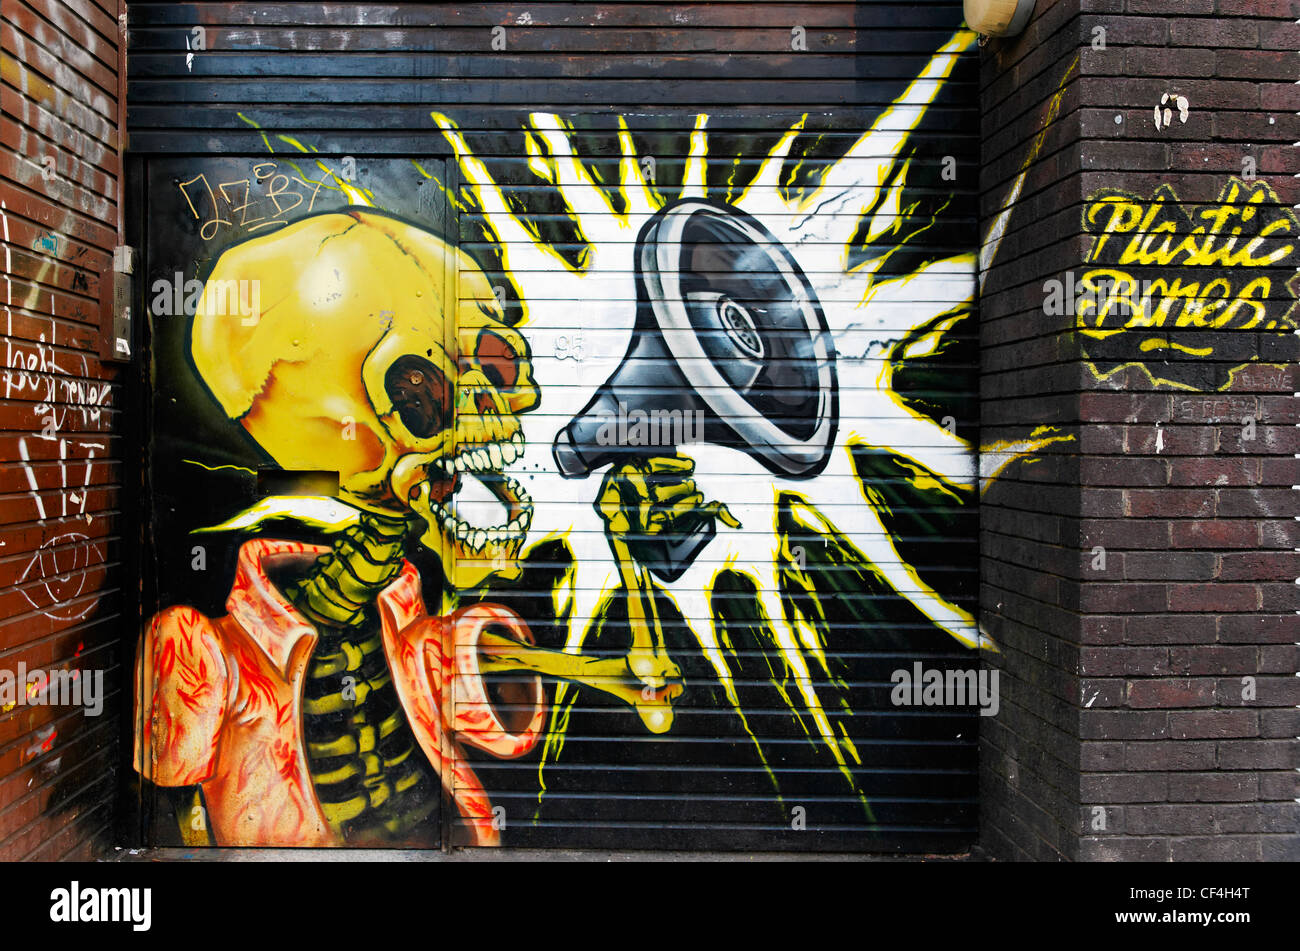 Plastic Bones graffiti on a building in Curtain Road in the east end of London. Stock Photo